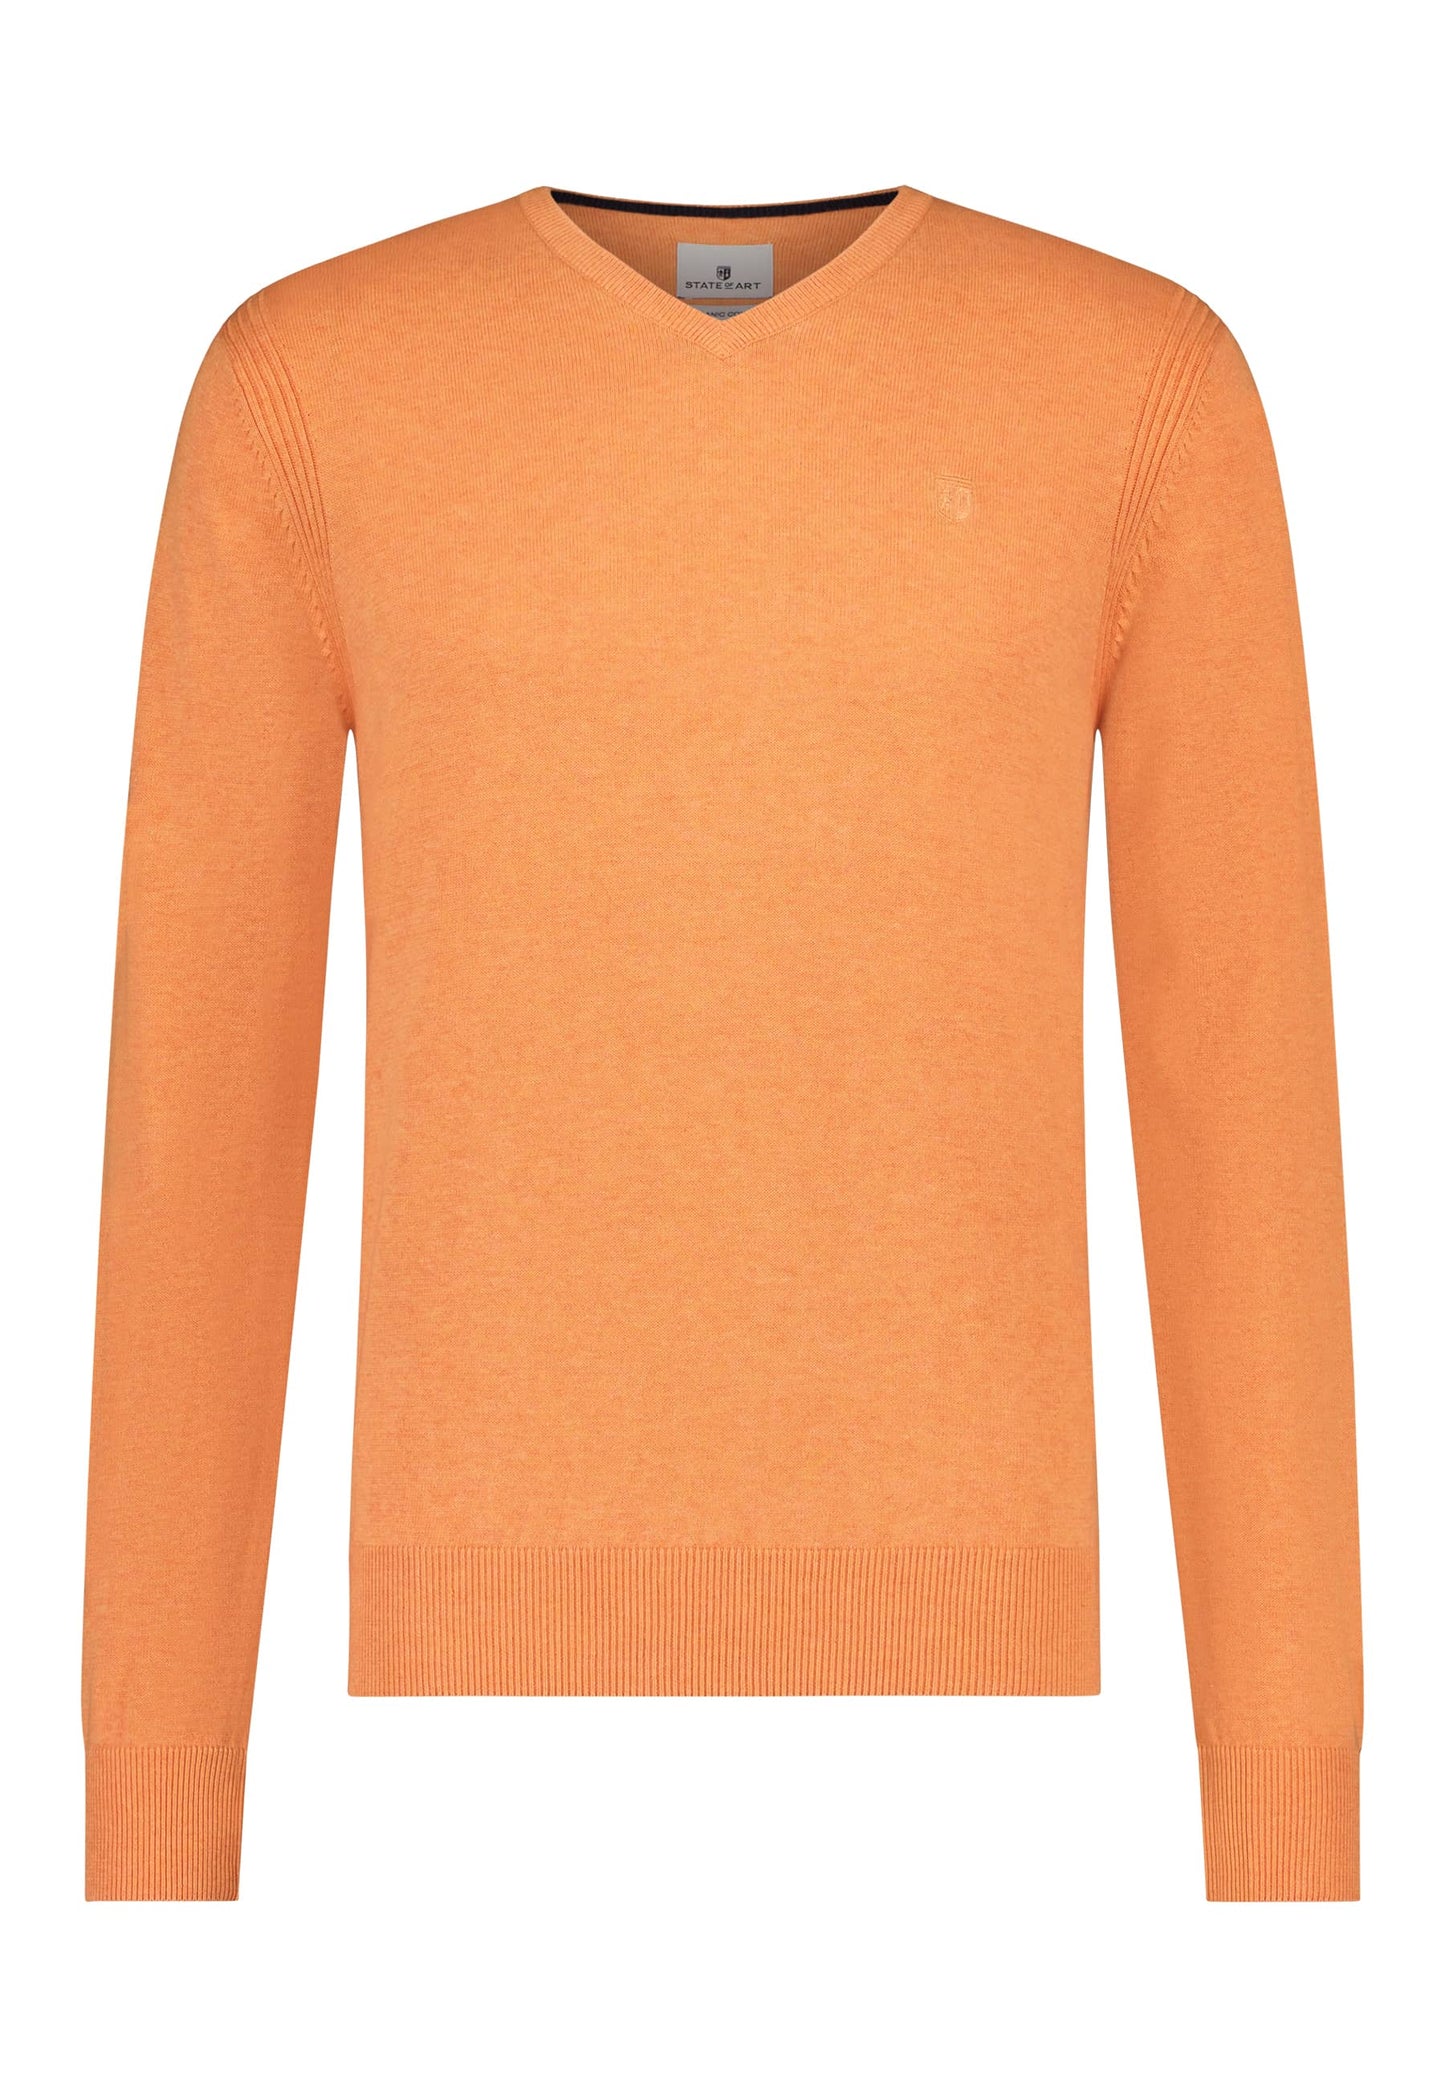 Salmon cotton V-neck pullover State of Art - 12051/2800